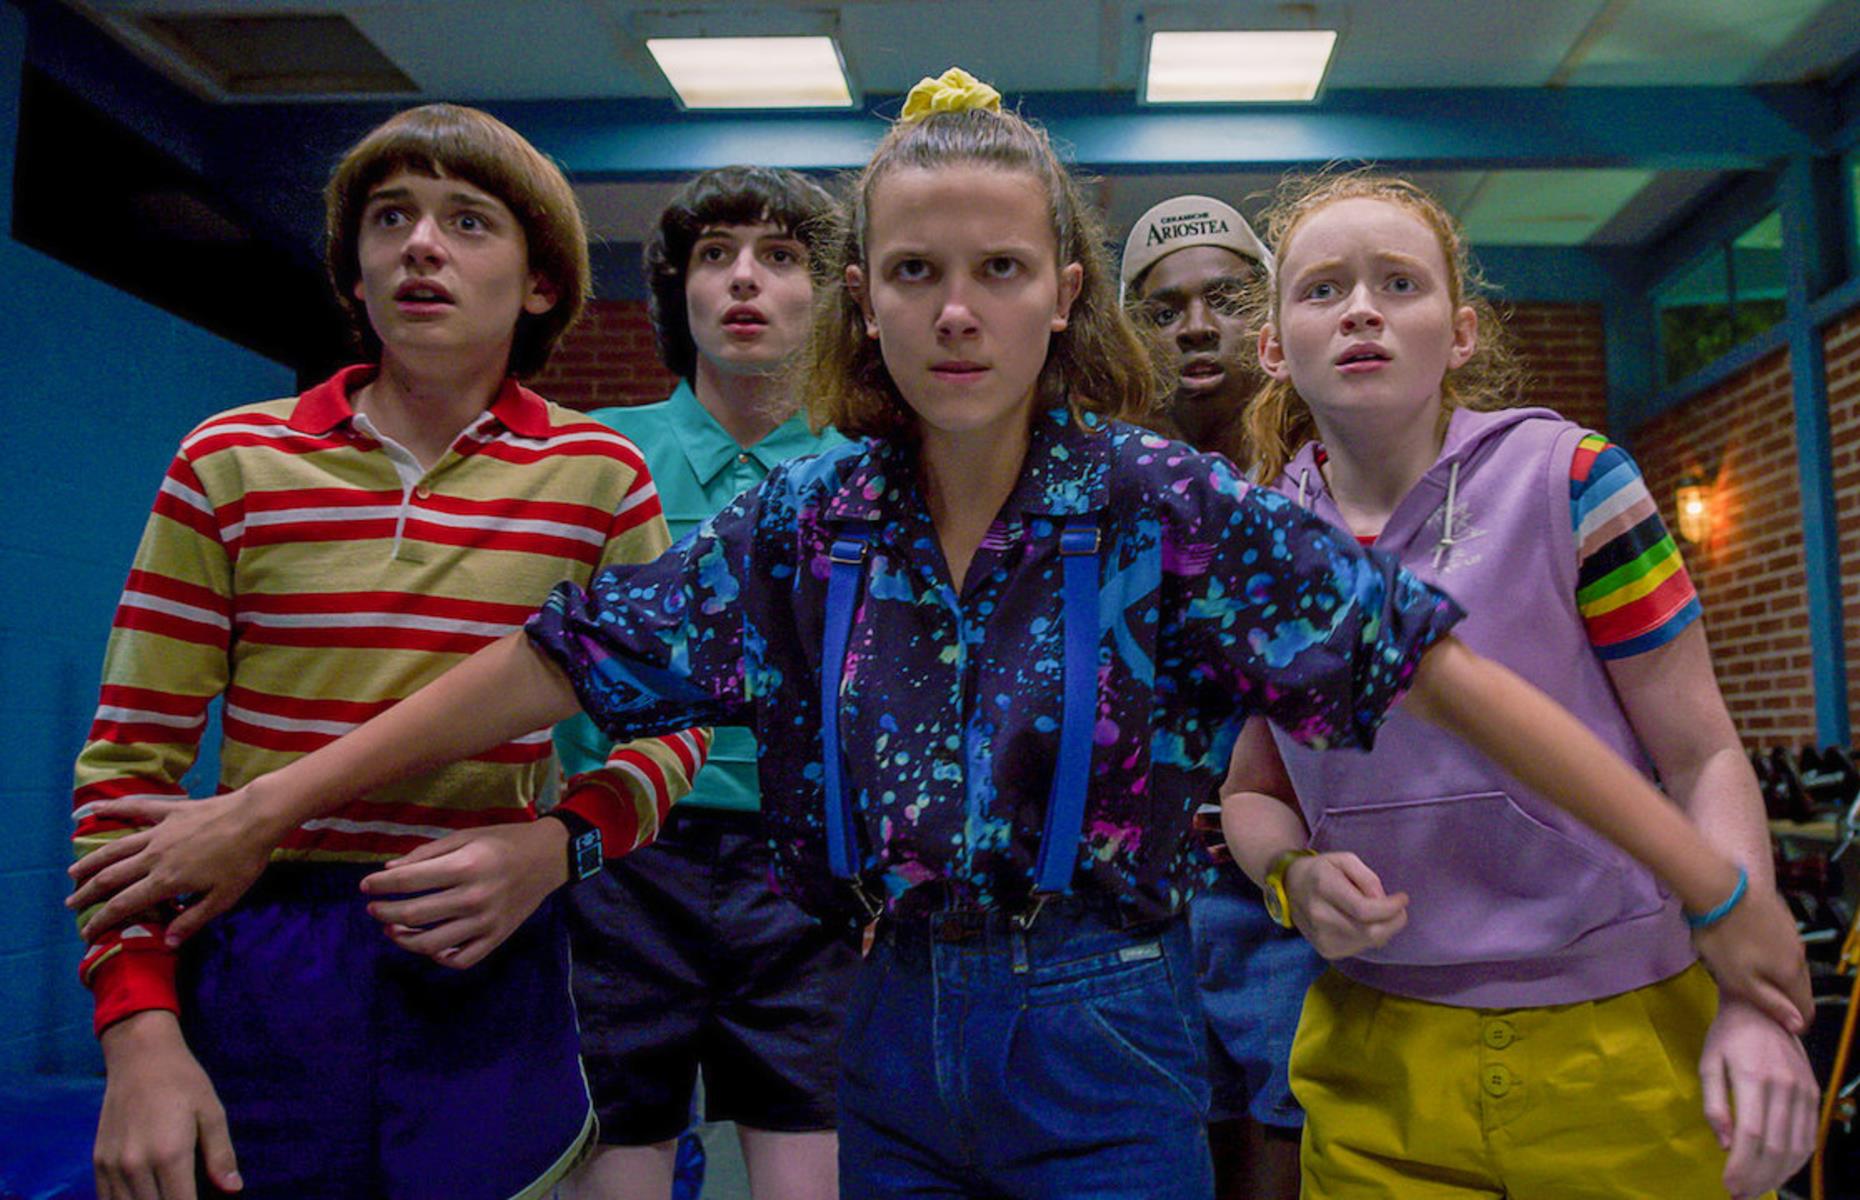  Stranger Things is the most watched English language original show